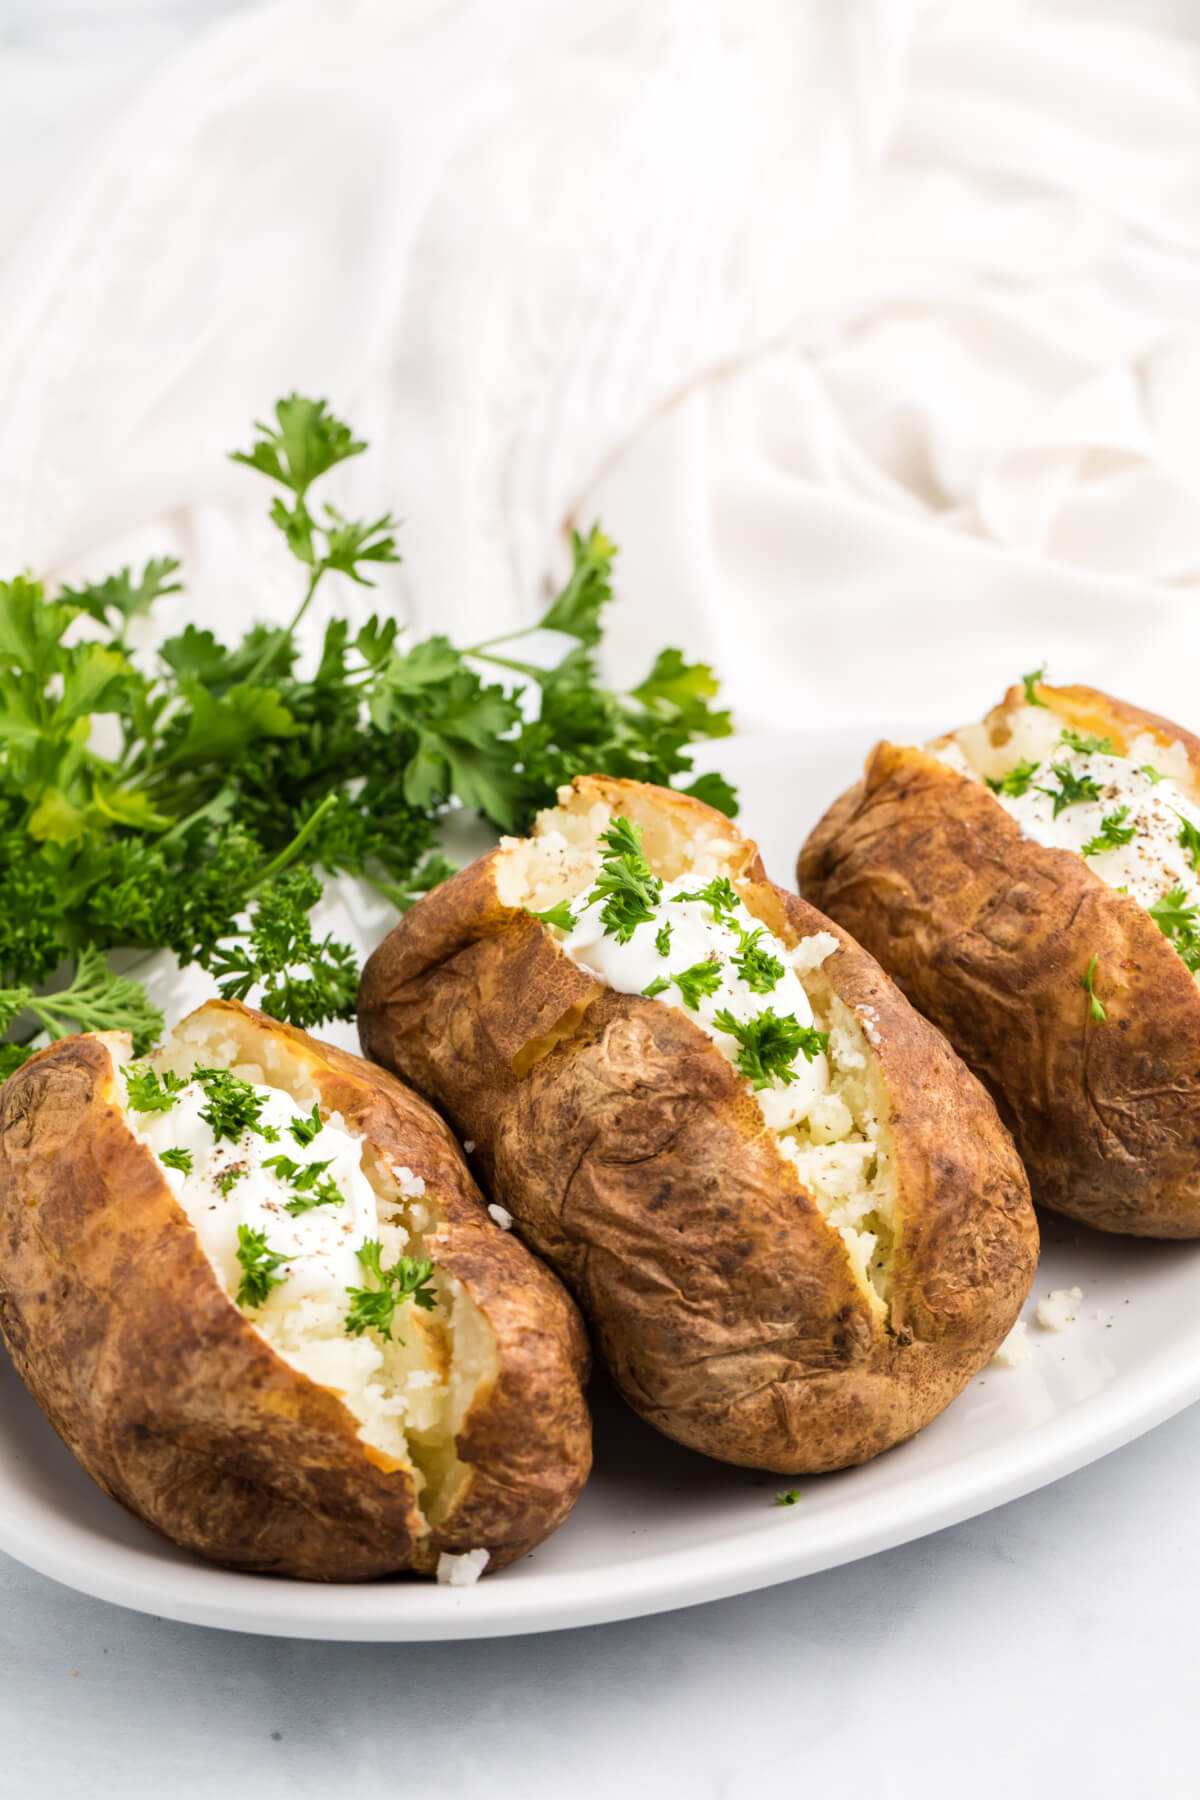 baked potatoes sliced open and topped with sour cream and fresh parsley.